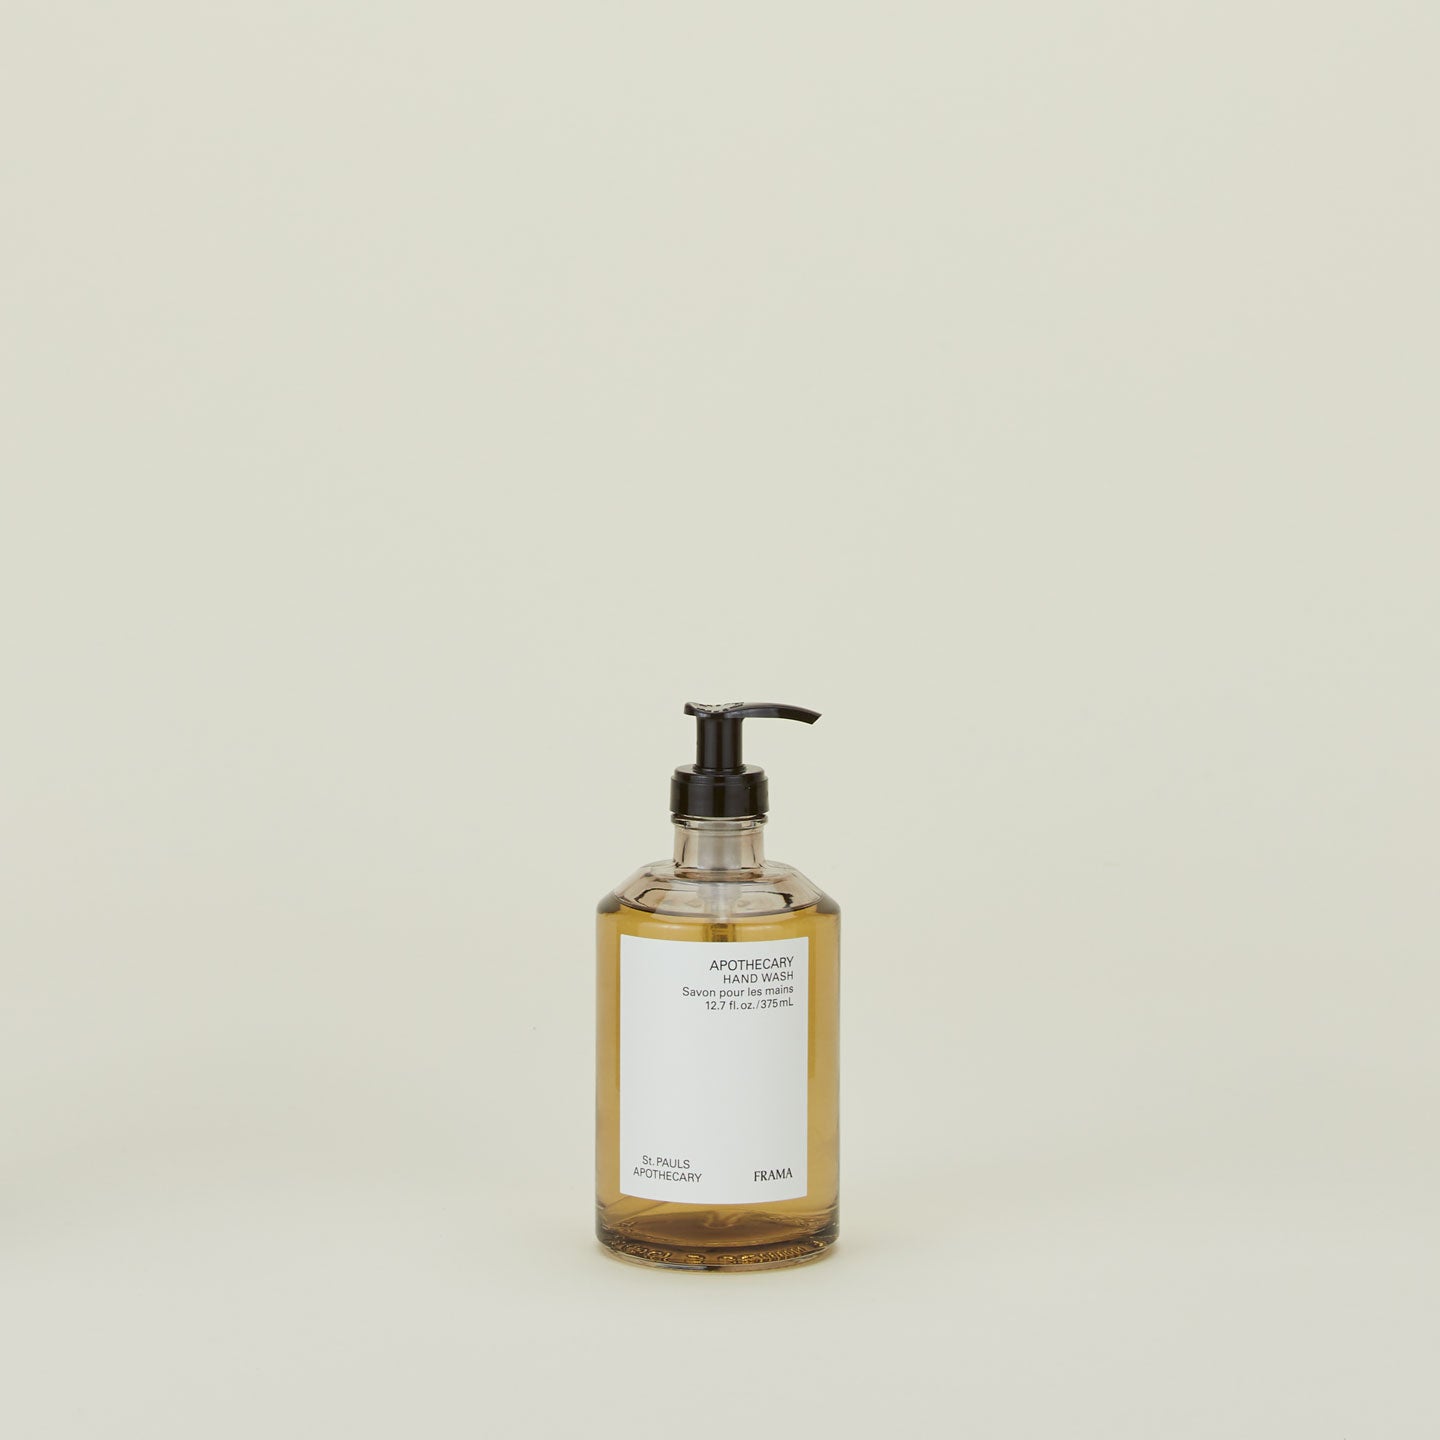 An apothecary scented liquid hand wash.